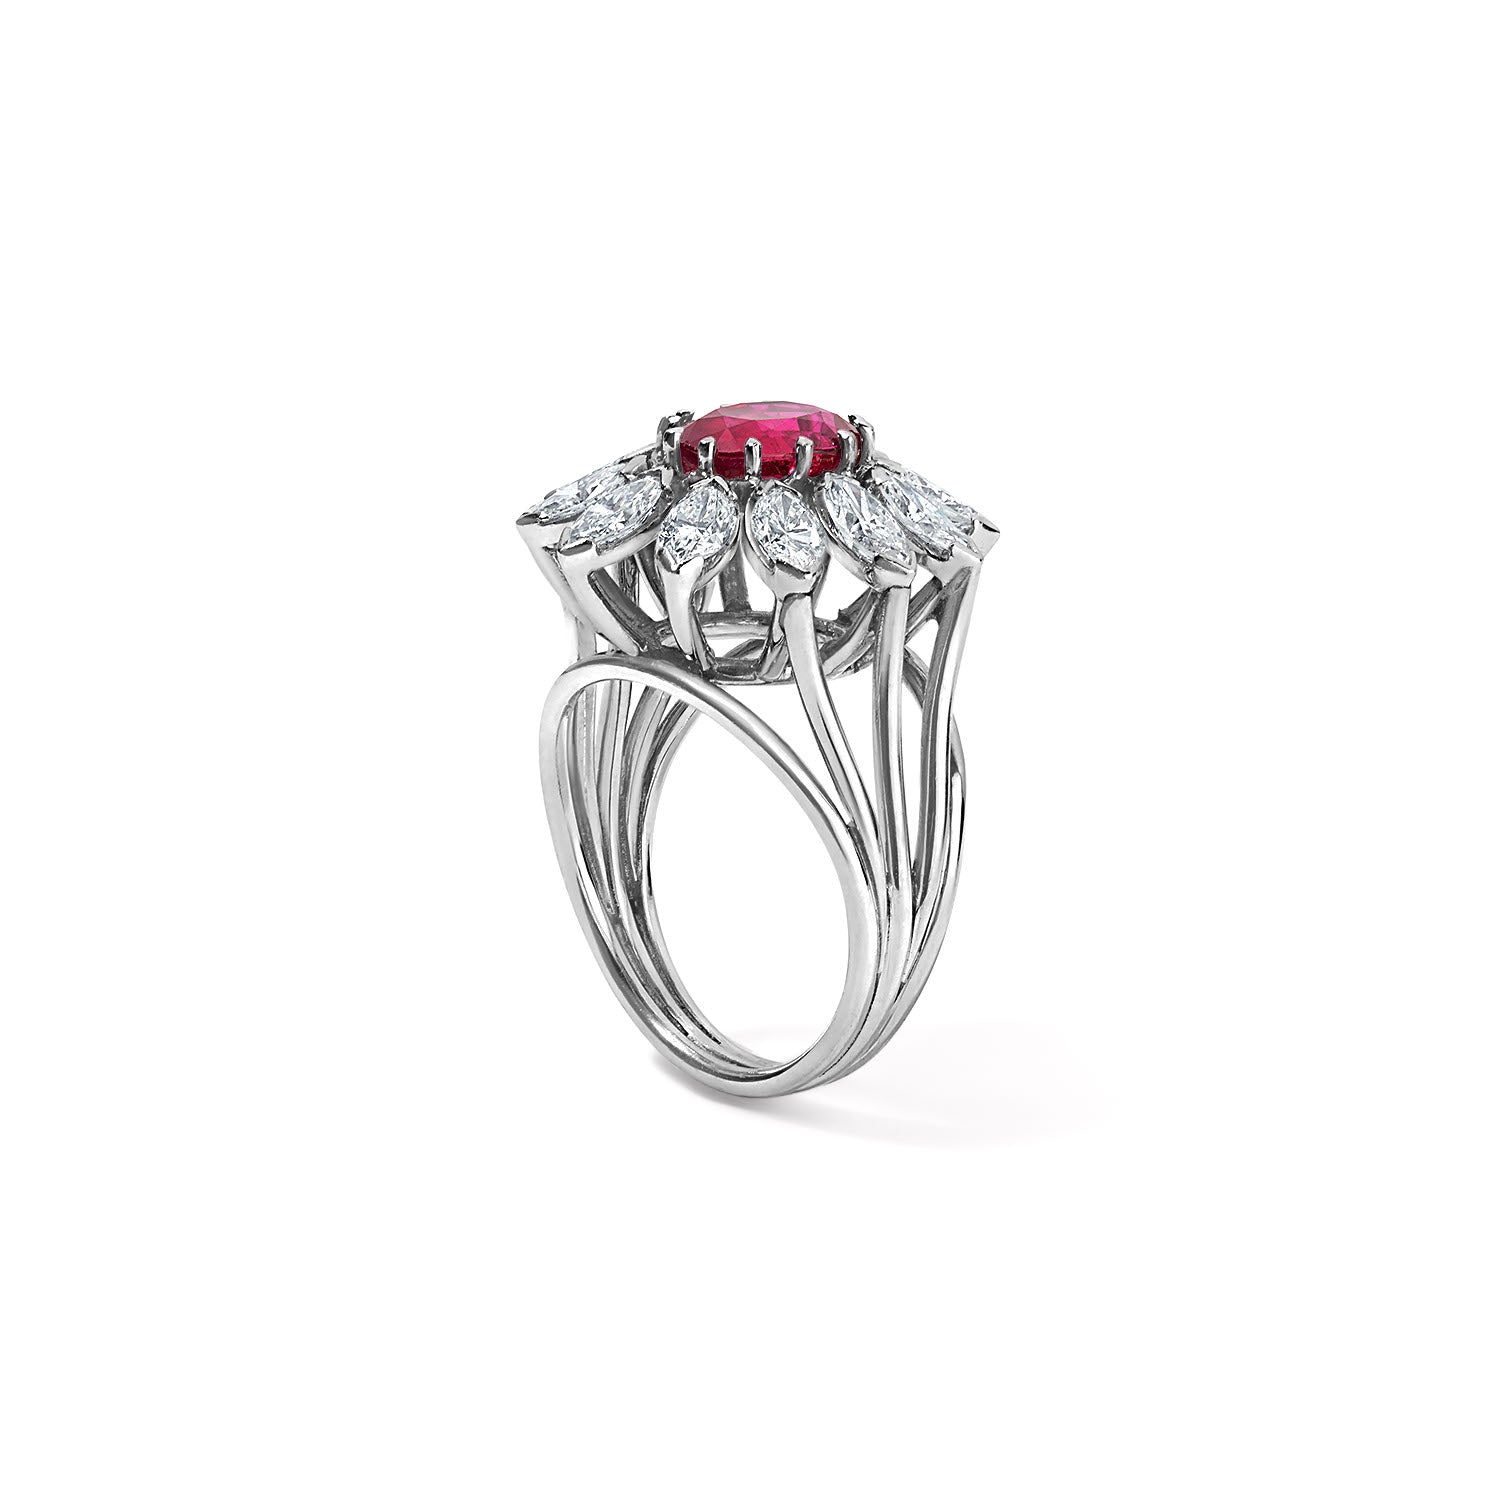 Vintage Diamond and Ruby Cocktail Ring